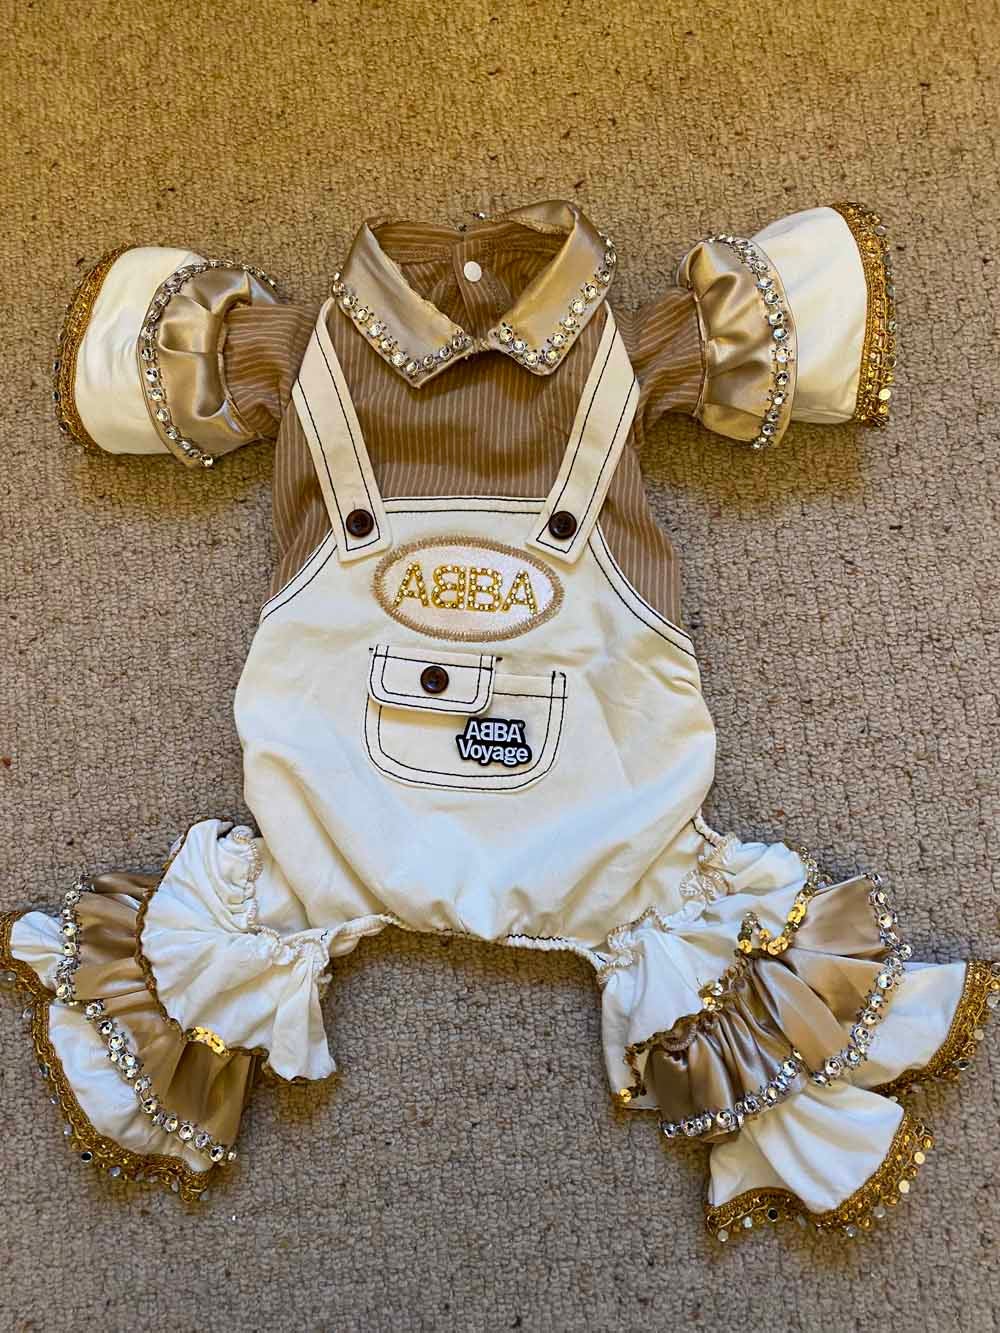 Jane finished her latest outfit for Simba the dog in November 2021 (Collect/PA Real Life).